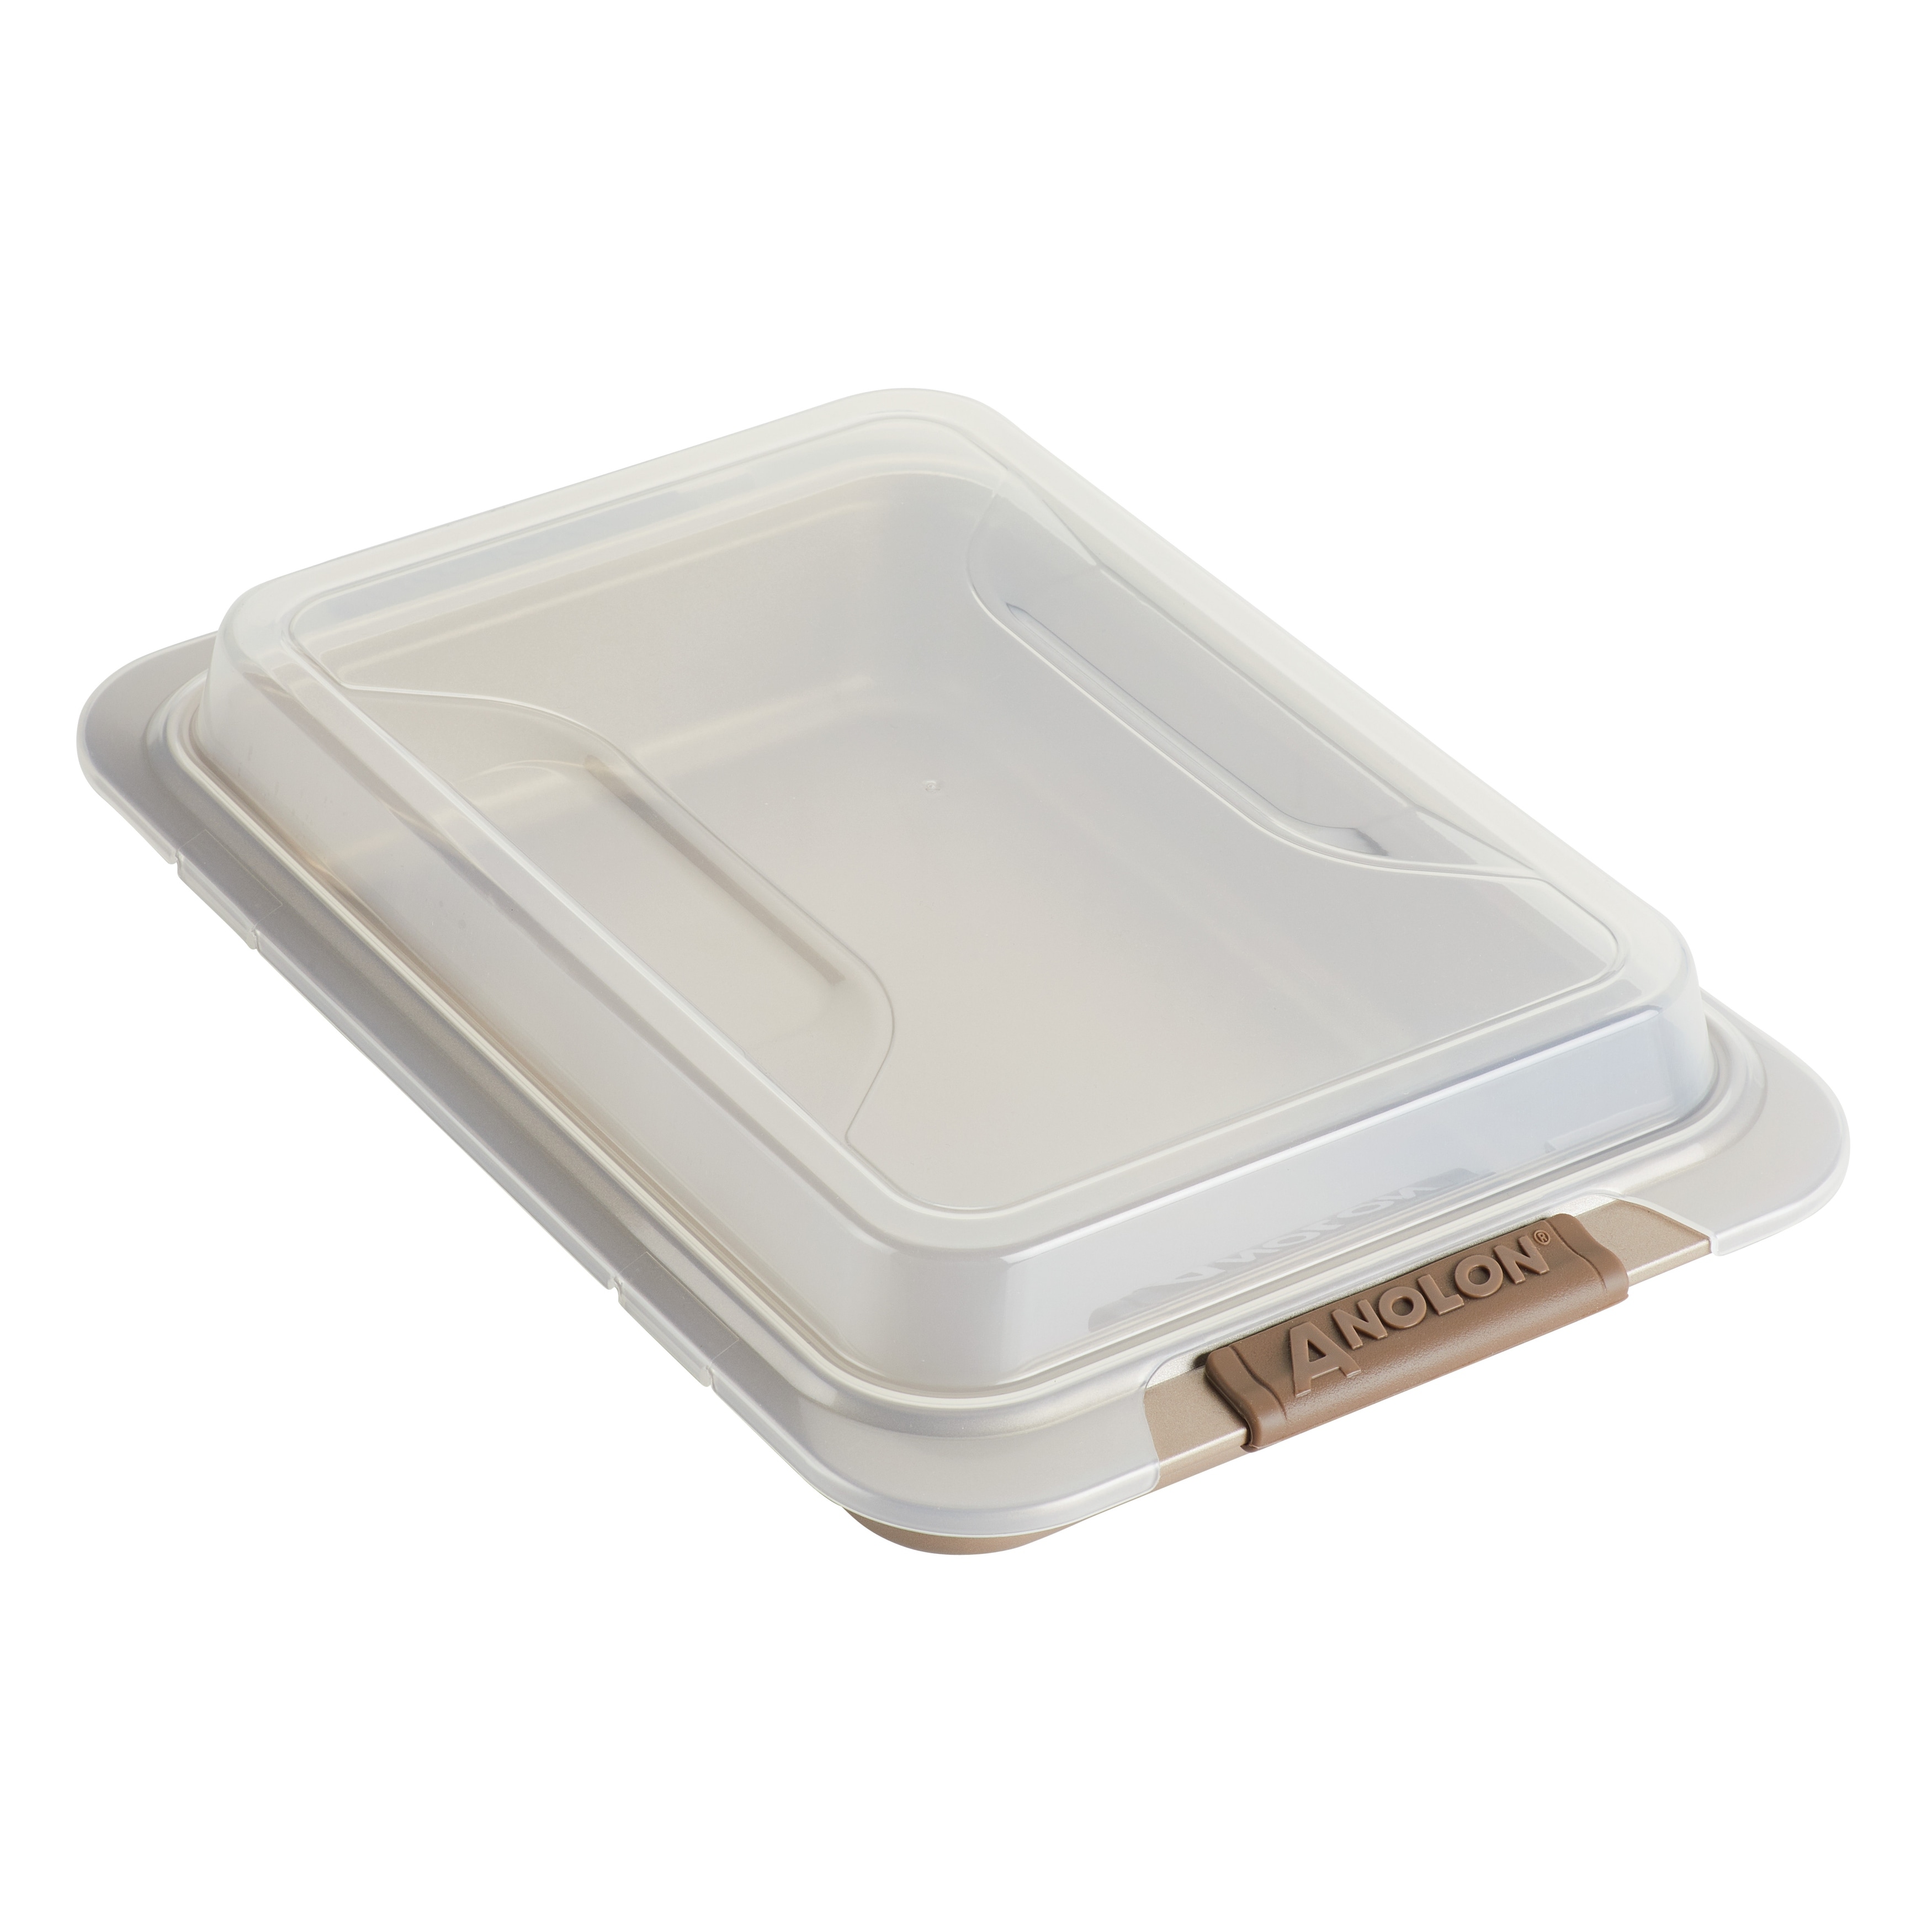 9 X 13 Inch Cake Pan With Lid